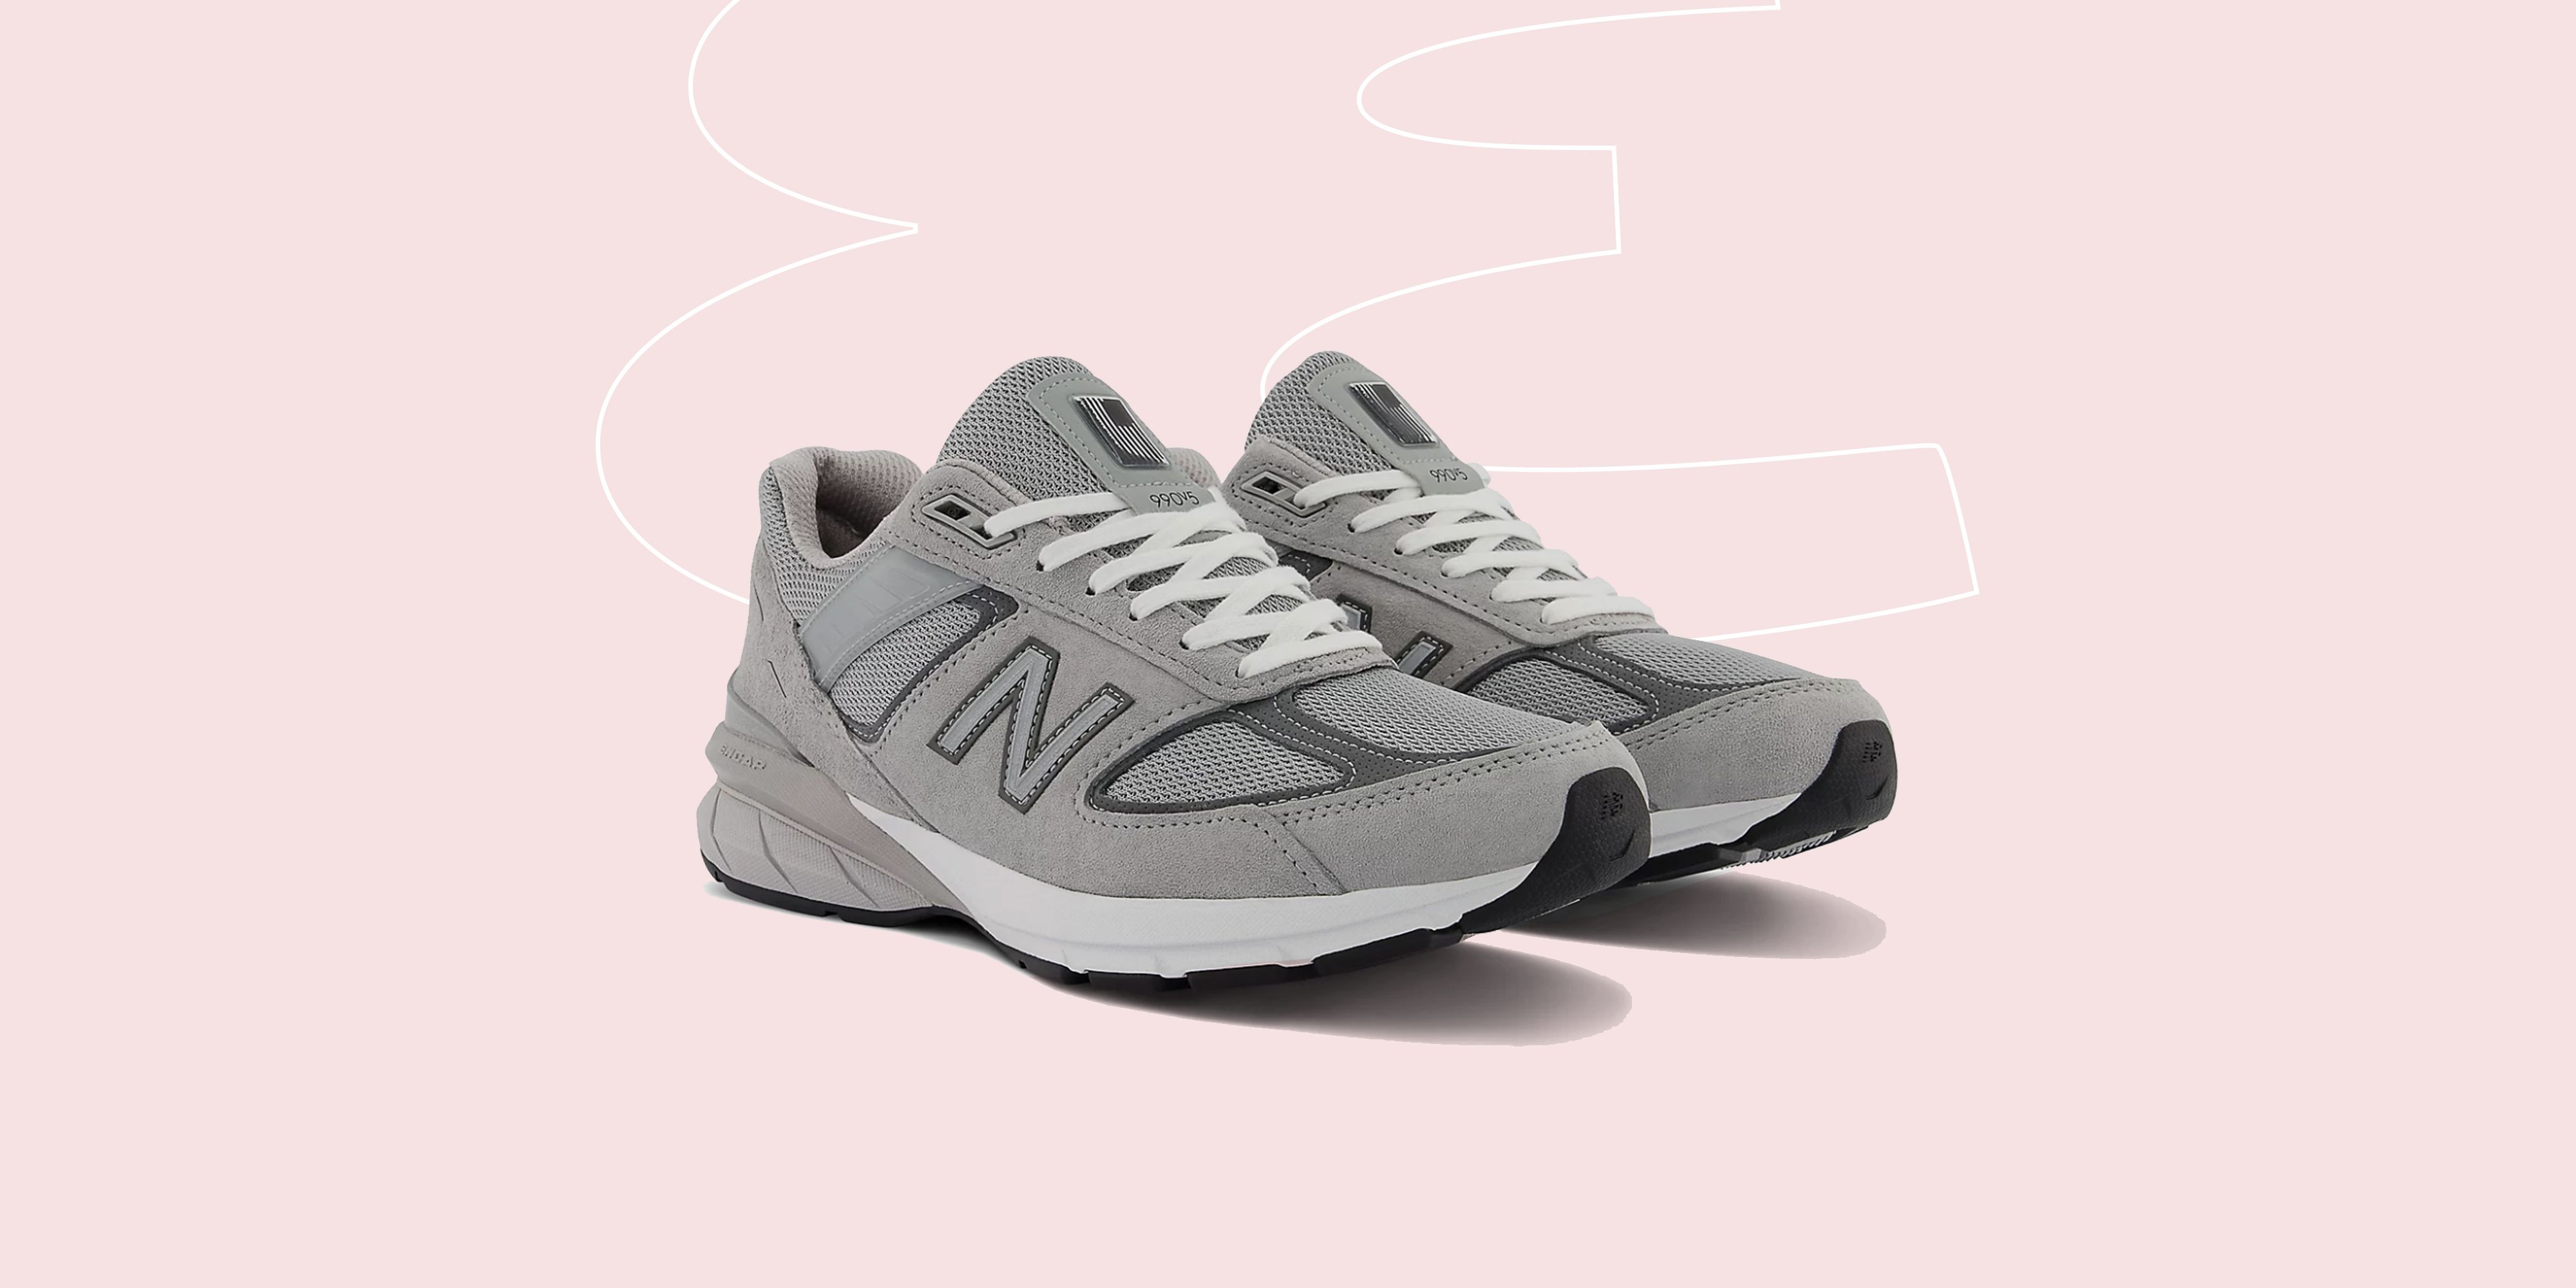 Are New Balance Dad Shoes Making a Comeback? • Feet Fact